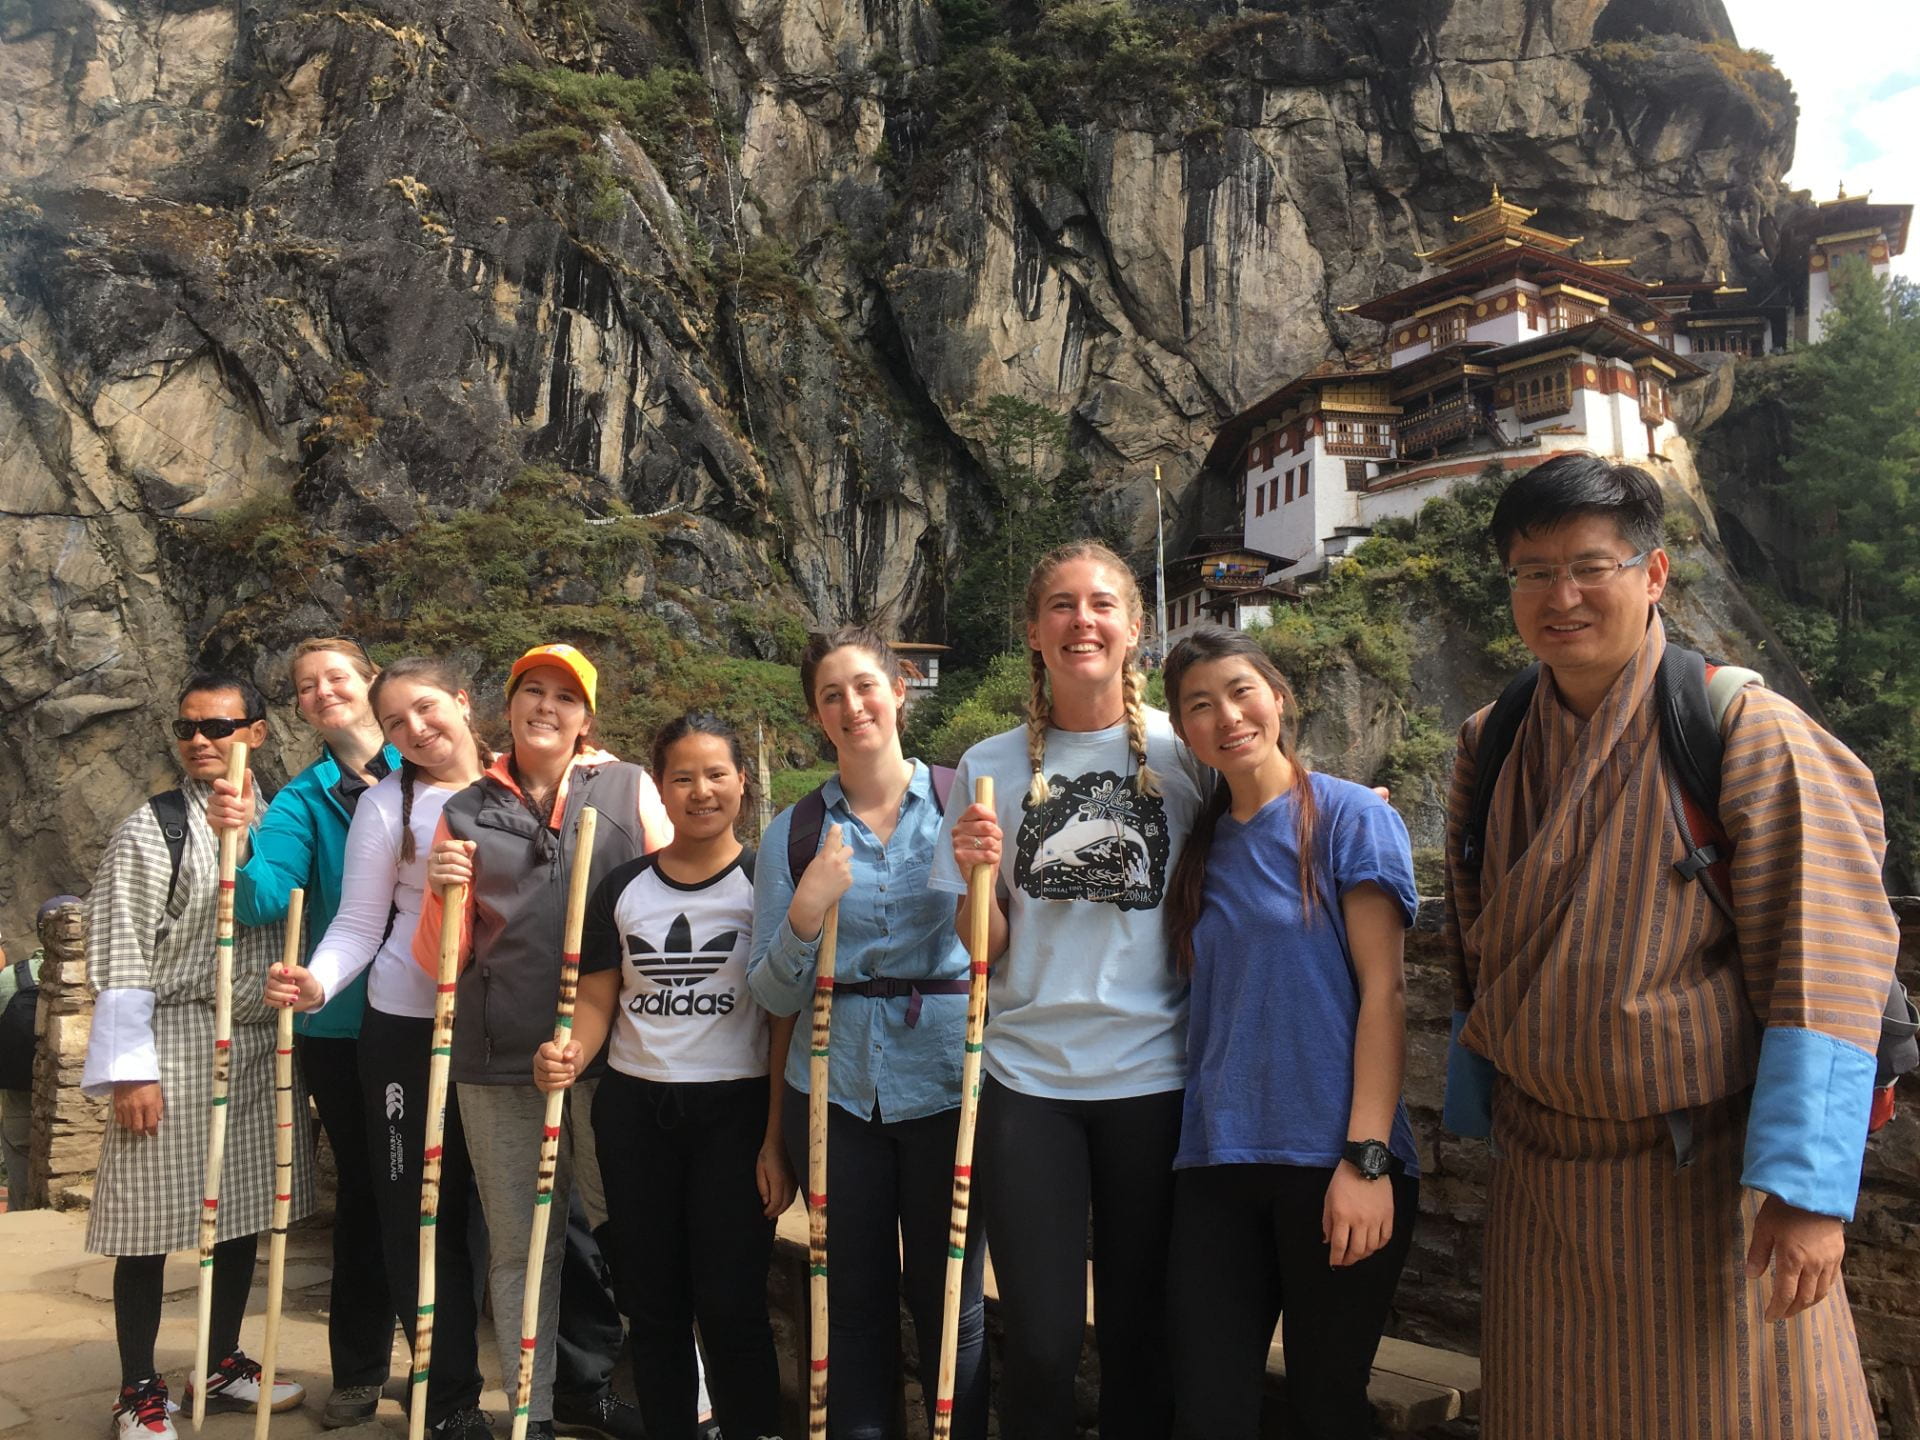 Students and their guides in traditional Bhutanese dress in front of a temple in a cliff side.